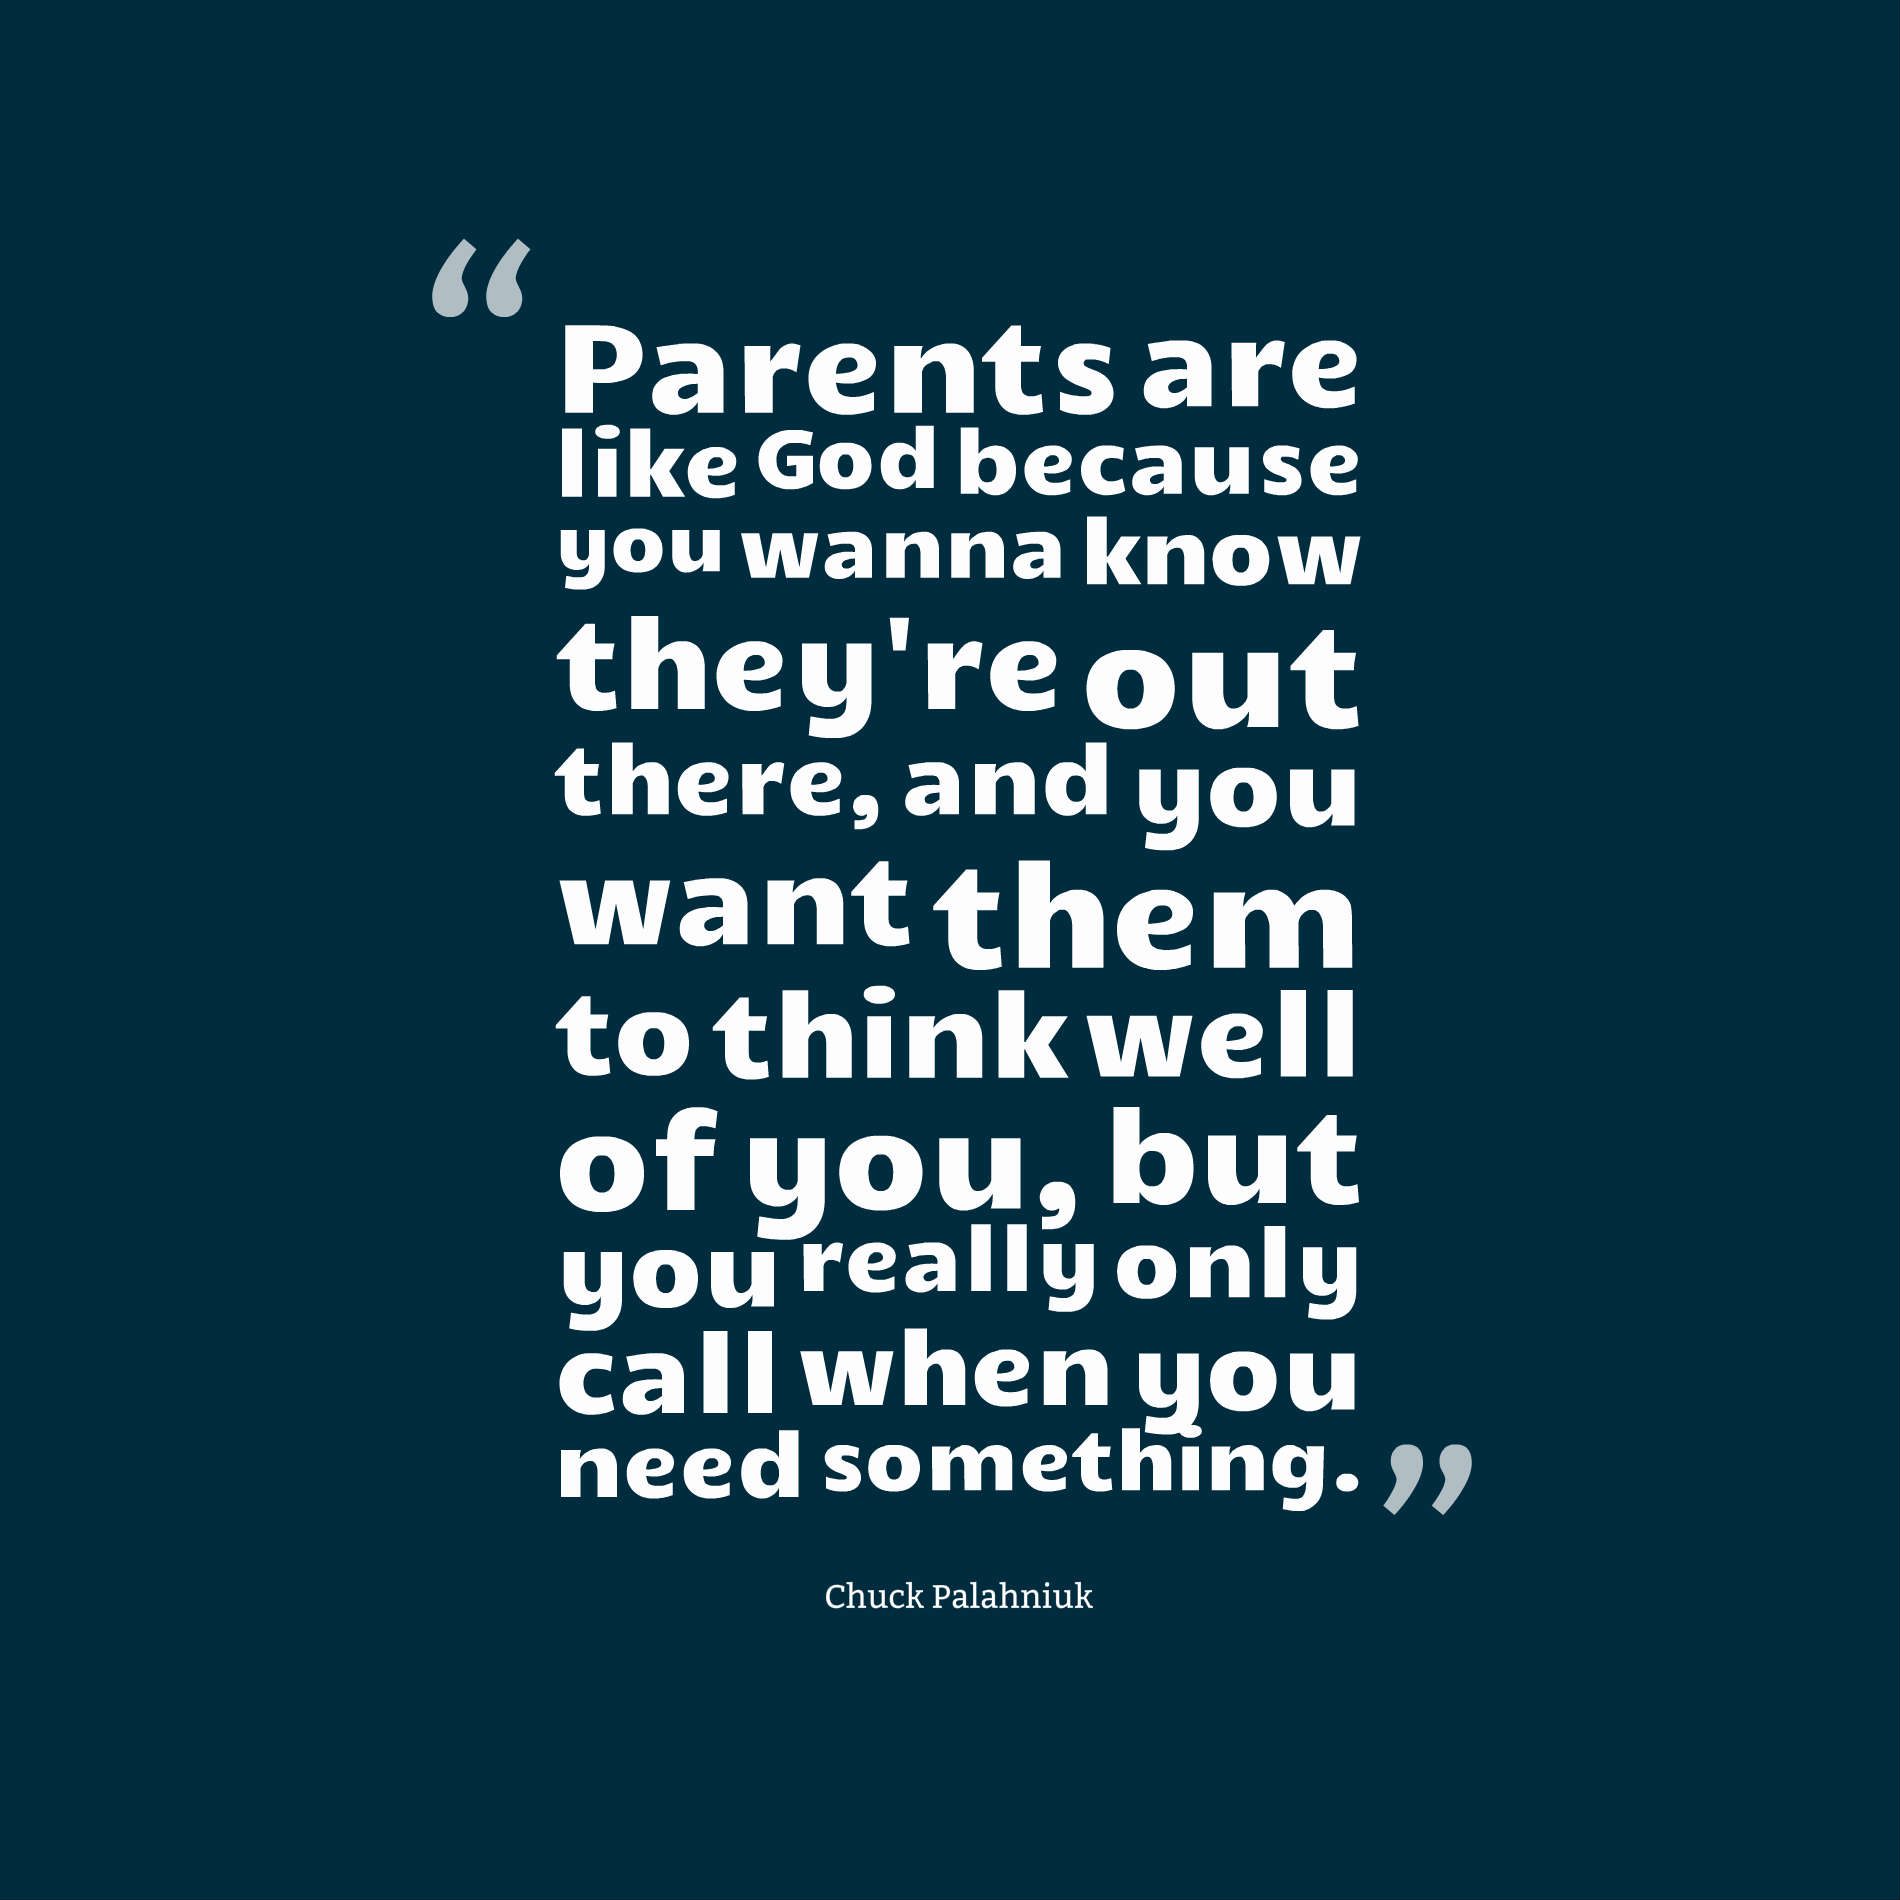 Parents are like God because you wanna know they're out there, and you want them to think well of you, but you really only call when you need something.